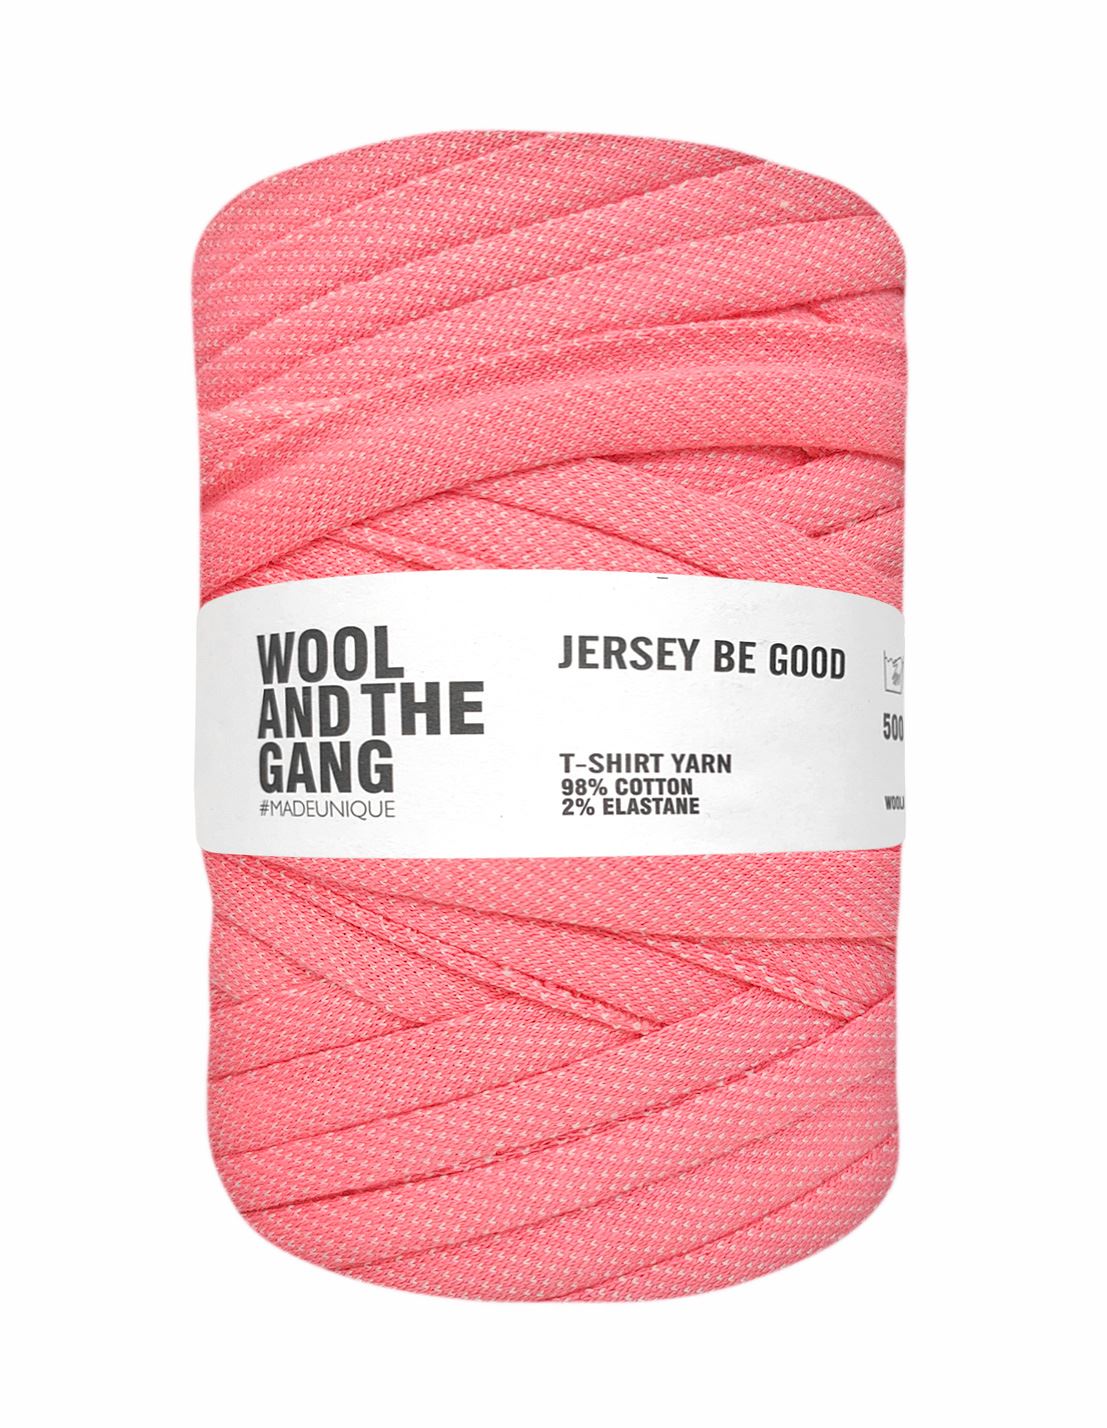 Bright Pink with white dots Jersey Be Good t-shirt yarn by Wool and the Gang (500g)